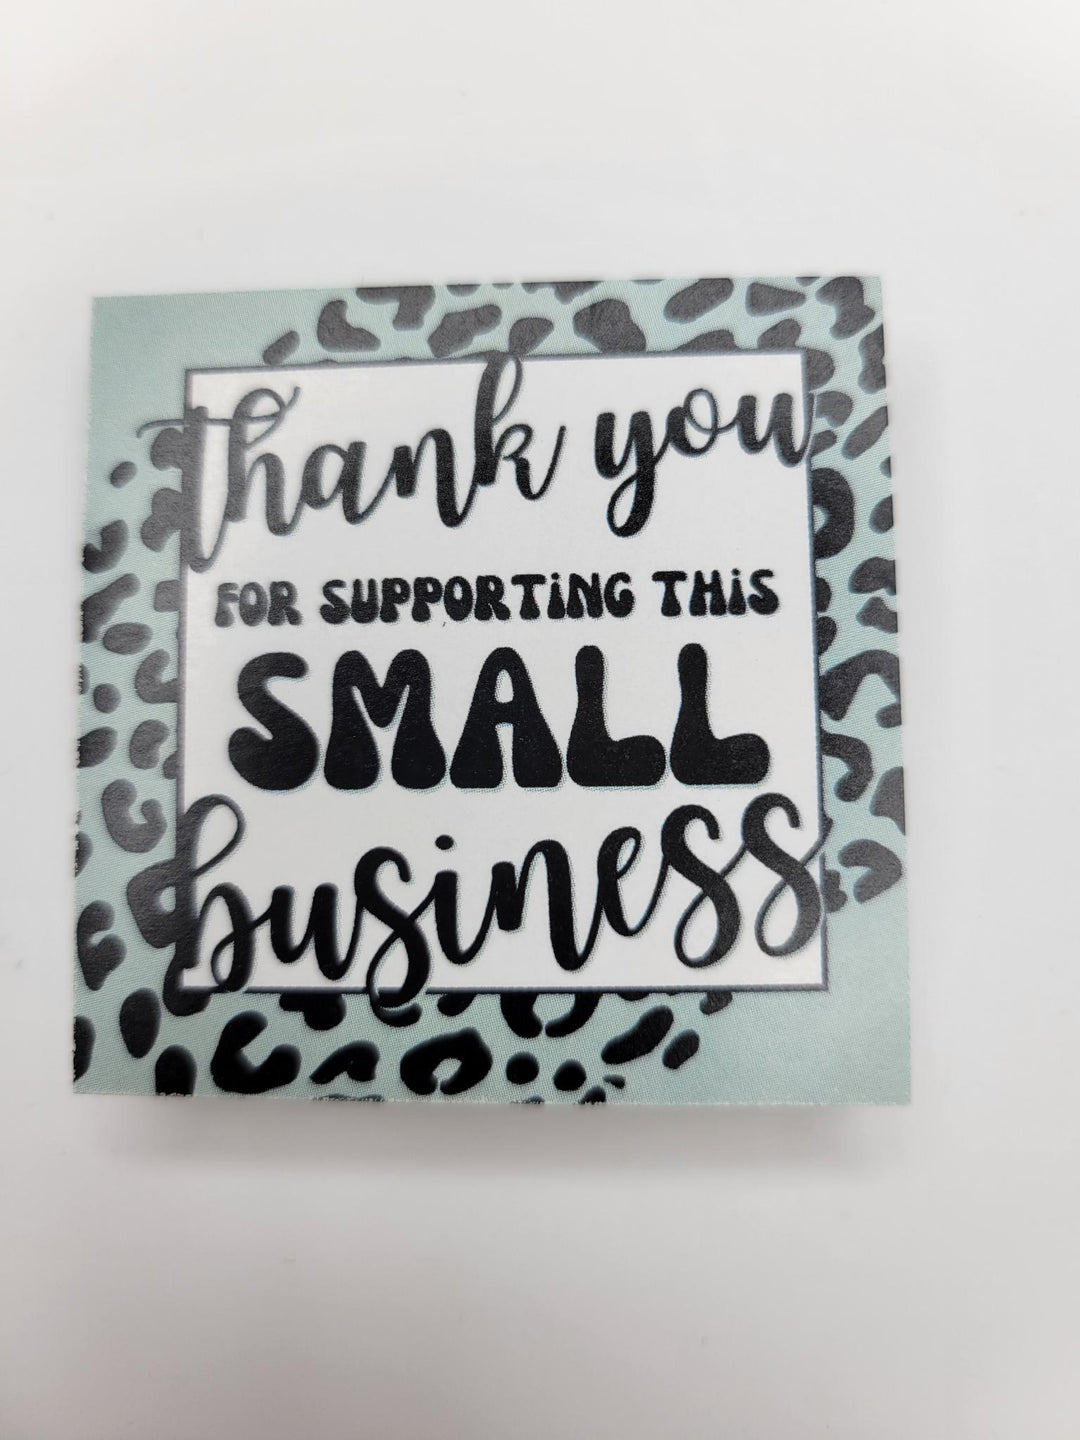 Teal Cheetah - Thank You Small Business | Peel Back Matte Laminate Stickers | Thank You Stickers